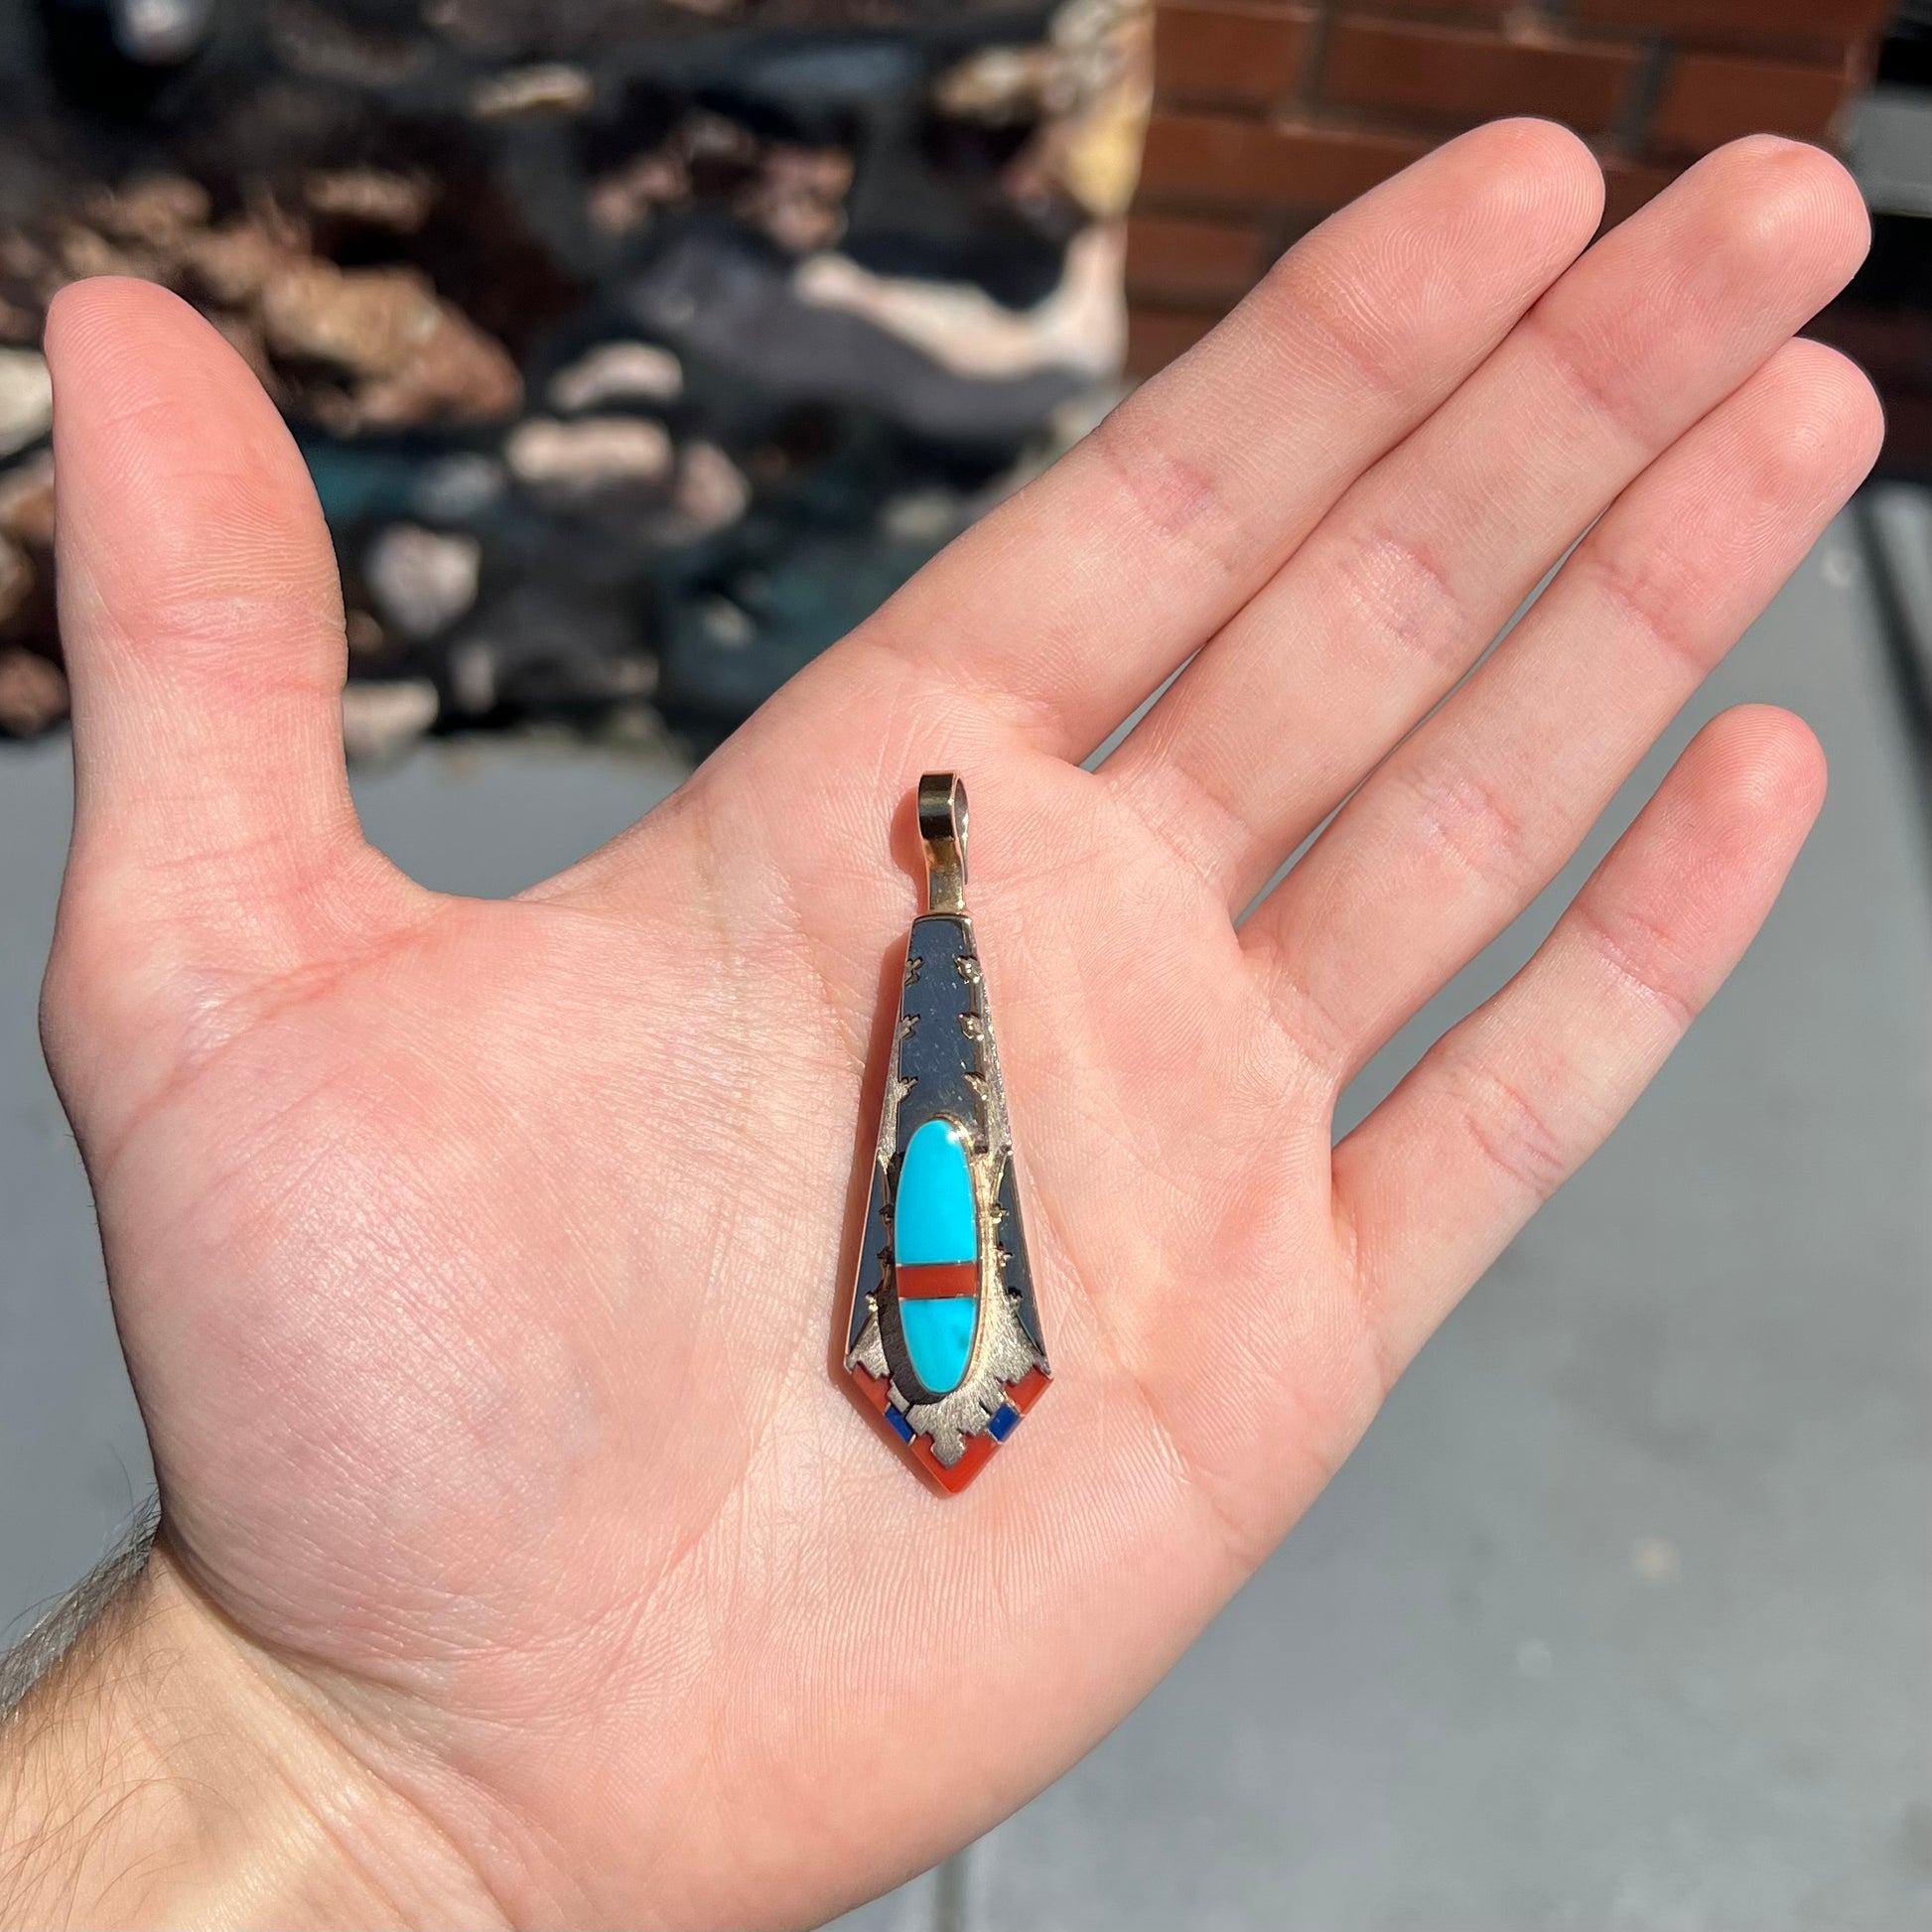 A yellow gold and sterling silver pendant inlaid with turquoise, coral, and lapis lazuli stones.  The piece is made by an unknown Native American artist and signed with the initials "LY".